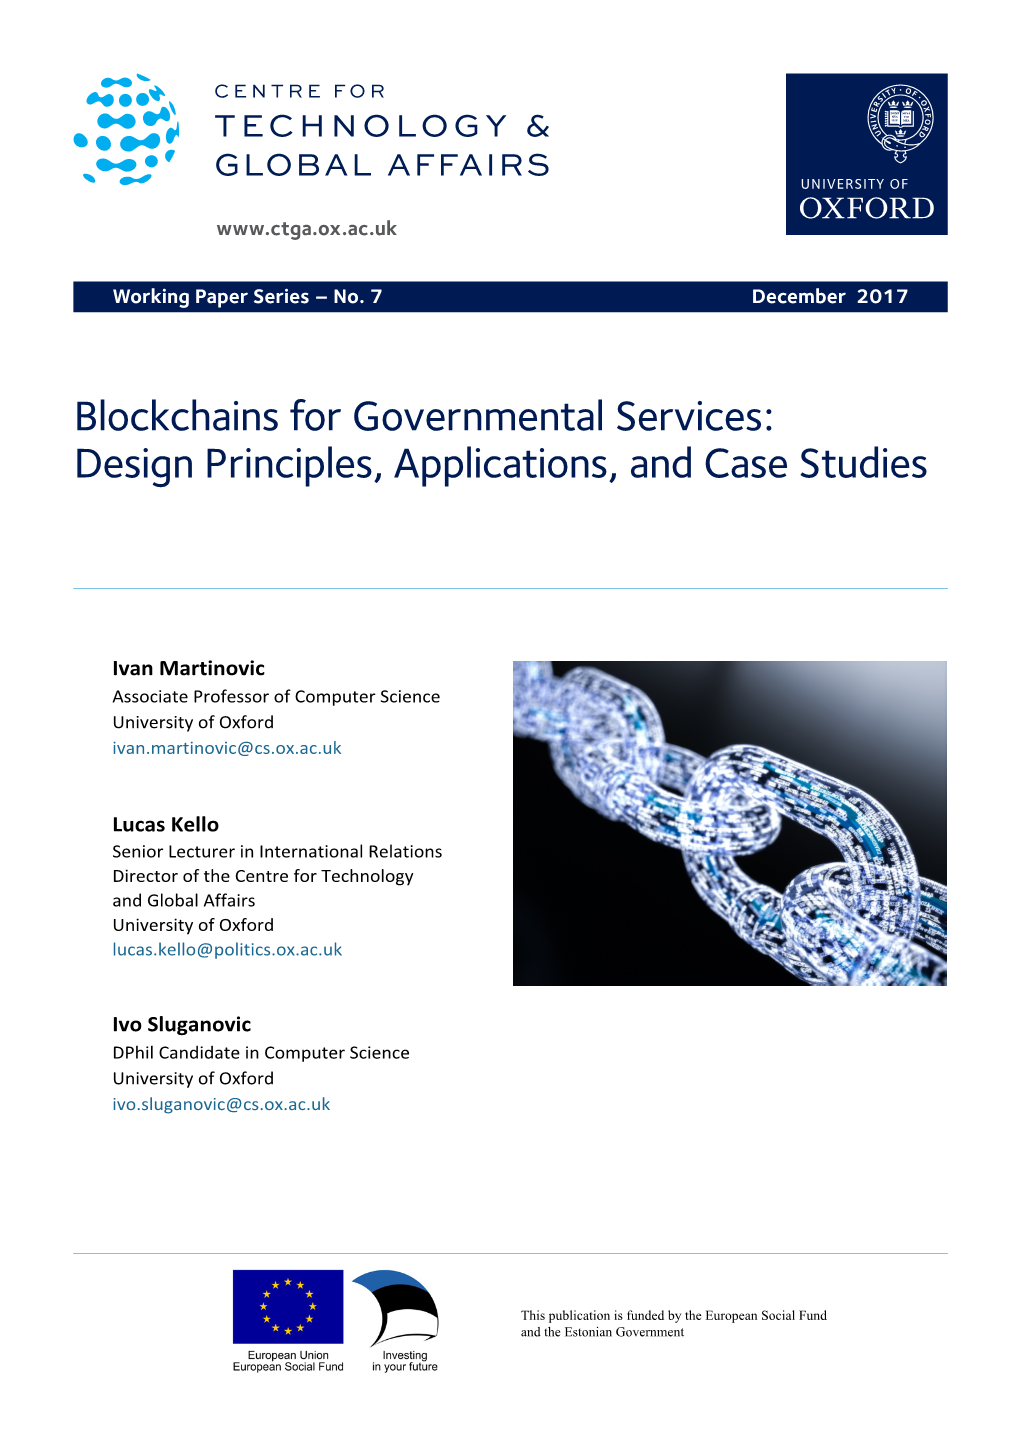 Blockchains for Governmental Services: Design Principles, Applications, and Case Studies